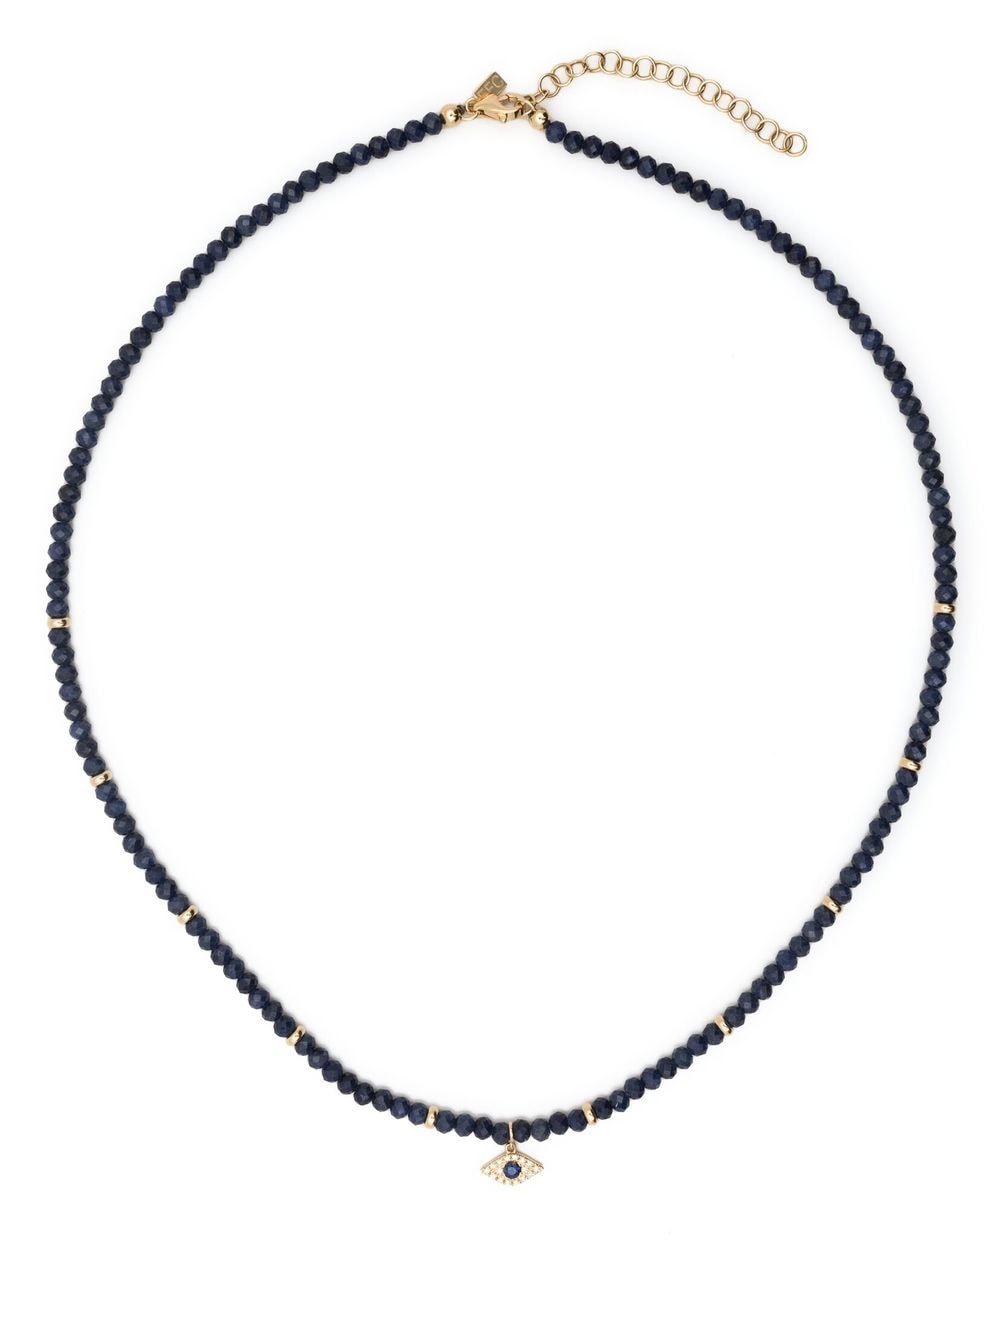 14kt yellow gold Evil Eye sapphire beaded necklace